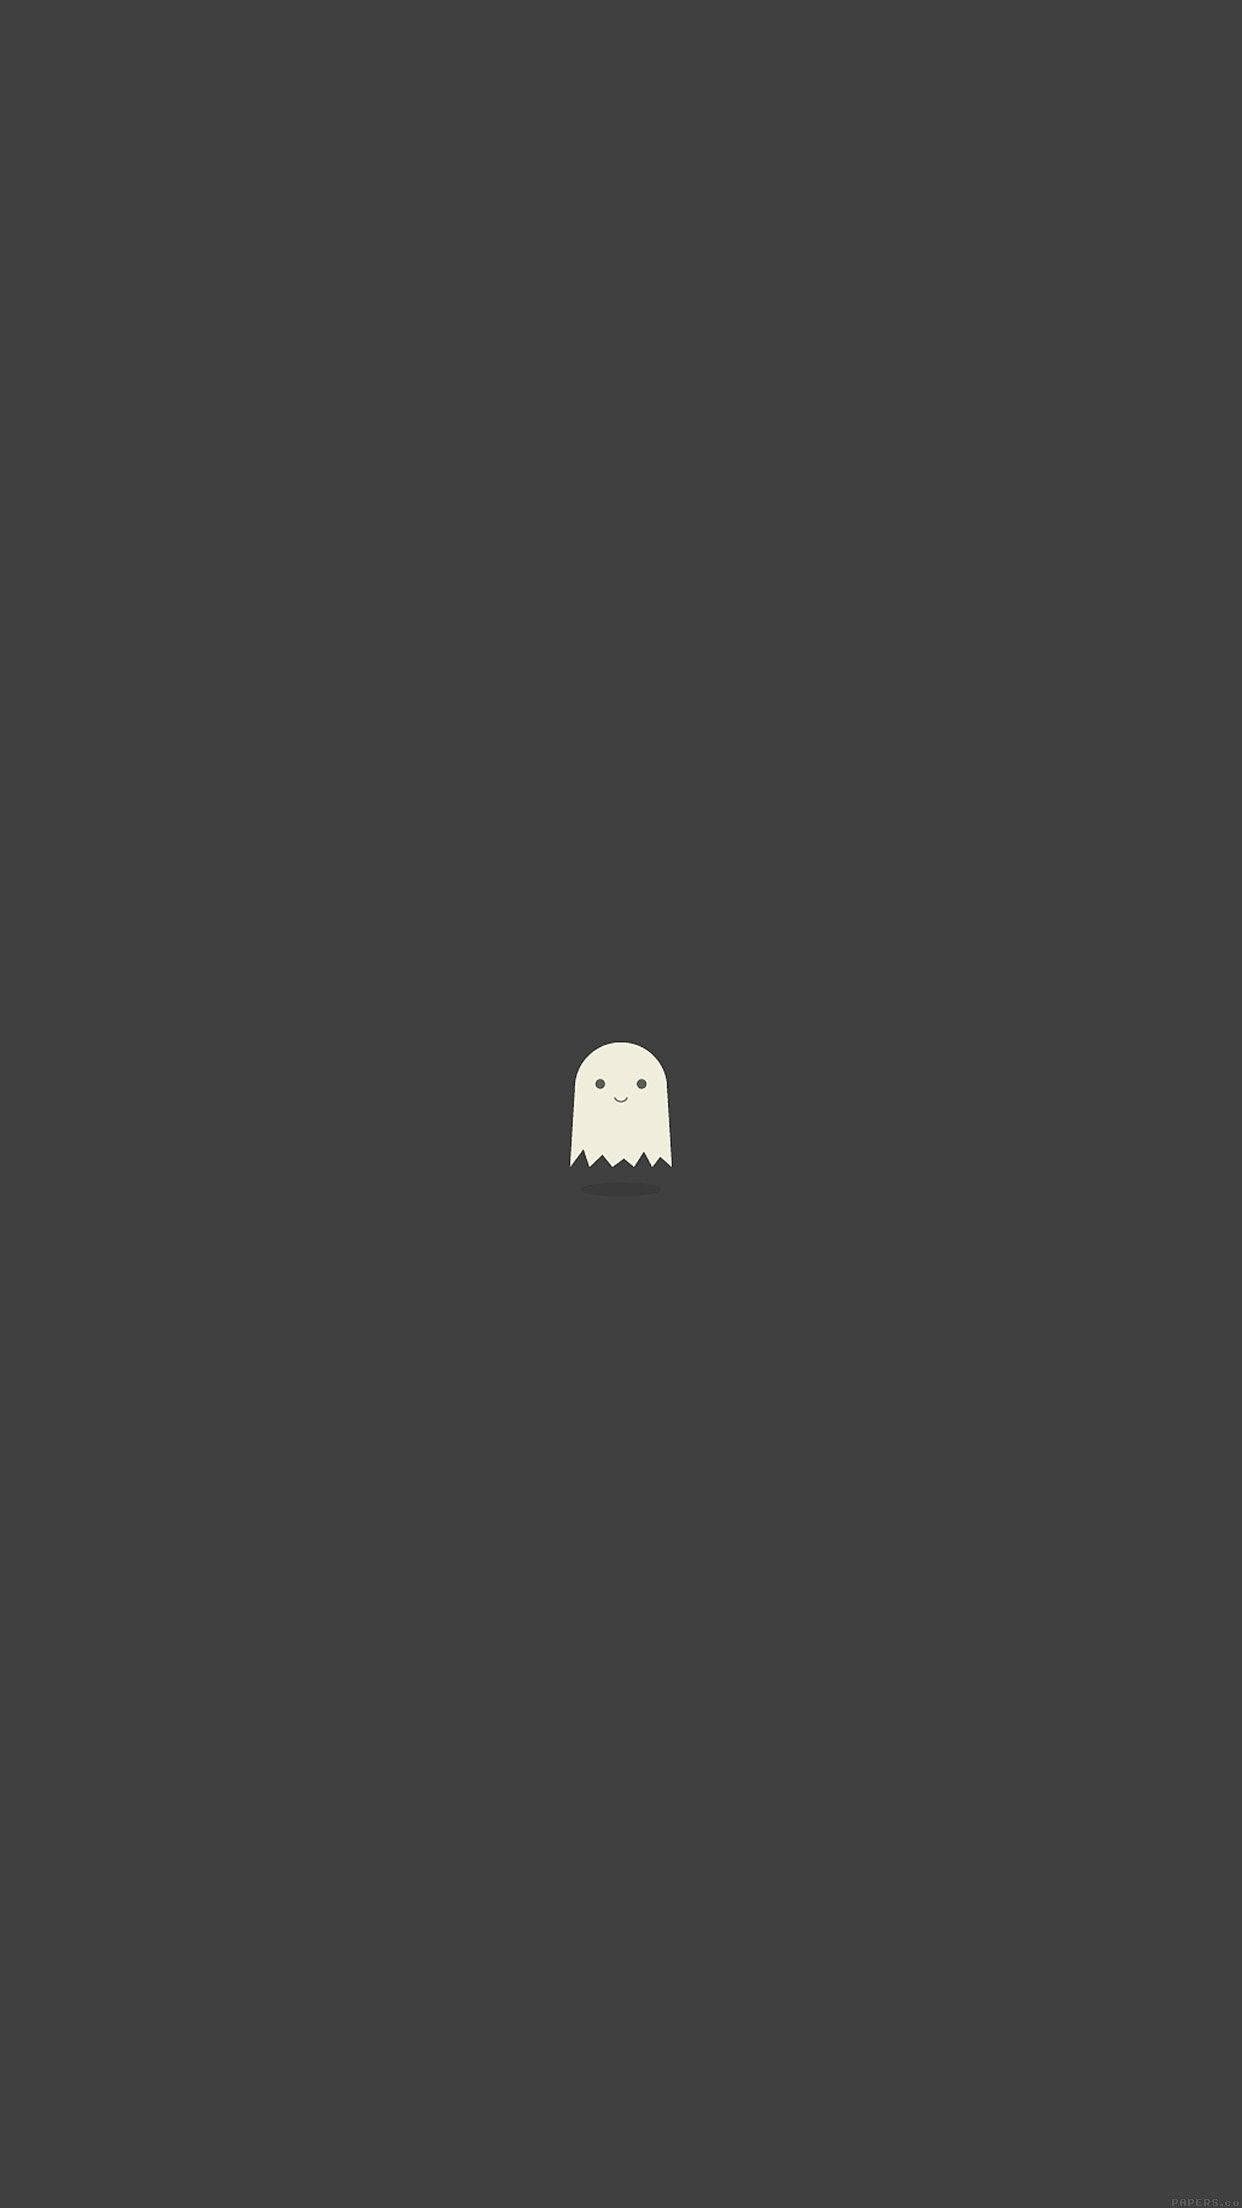 Minimalistic wallpaper of a ghost on a dark grey background - Ghost